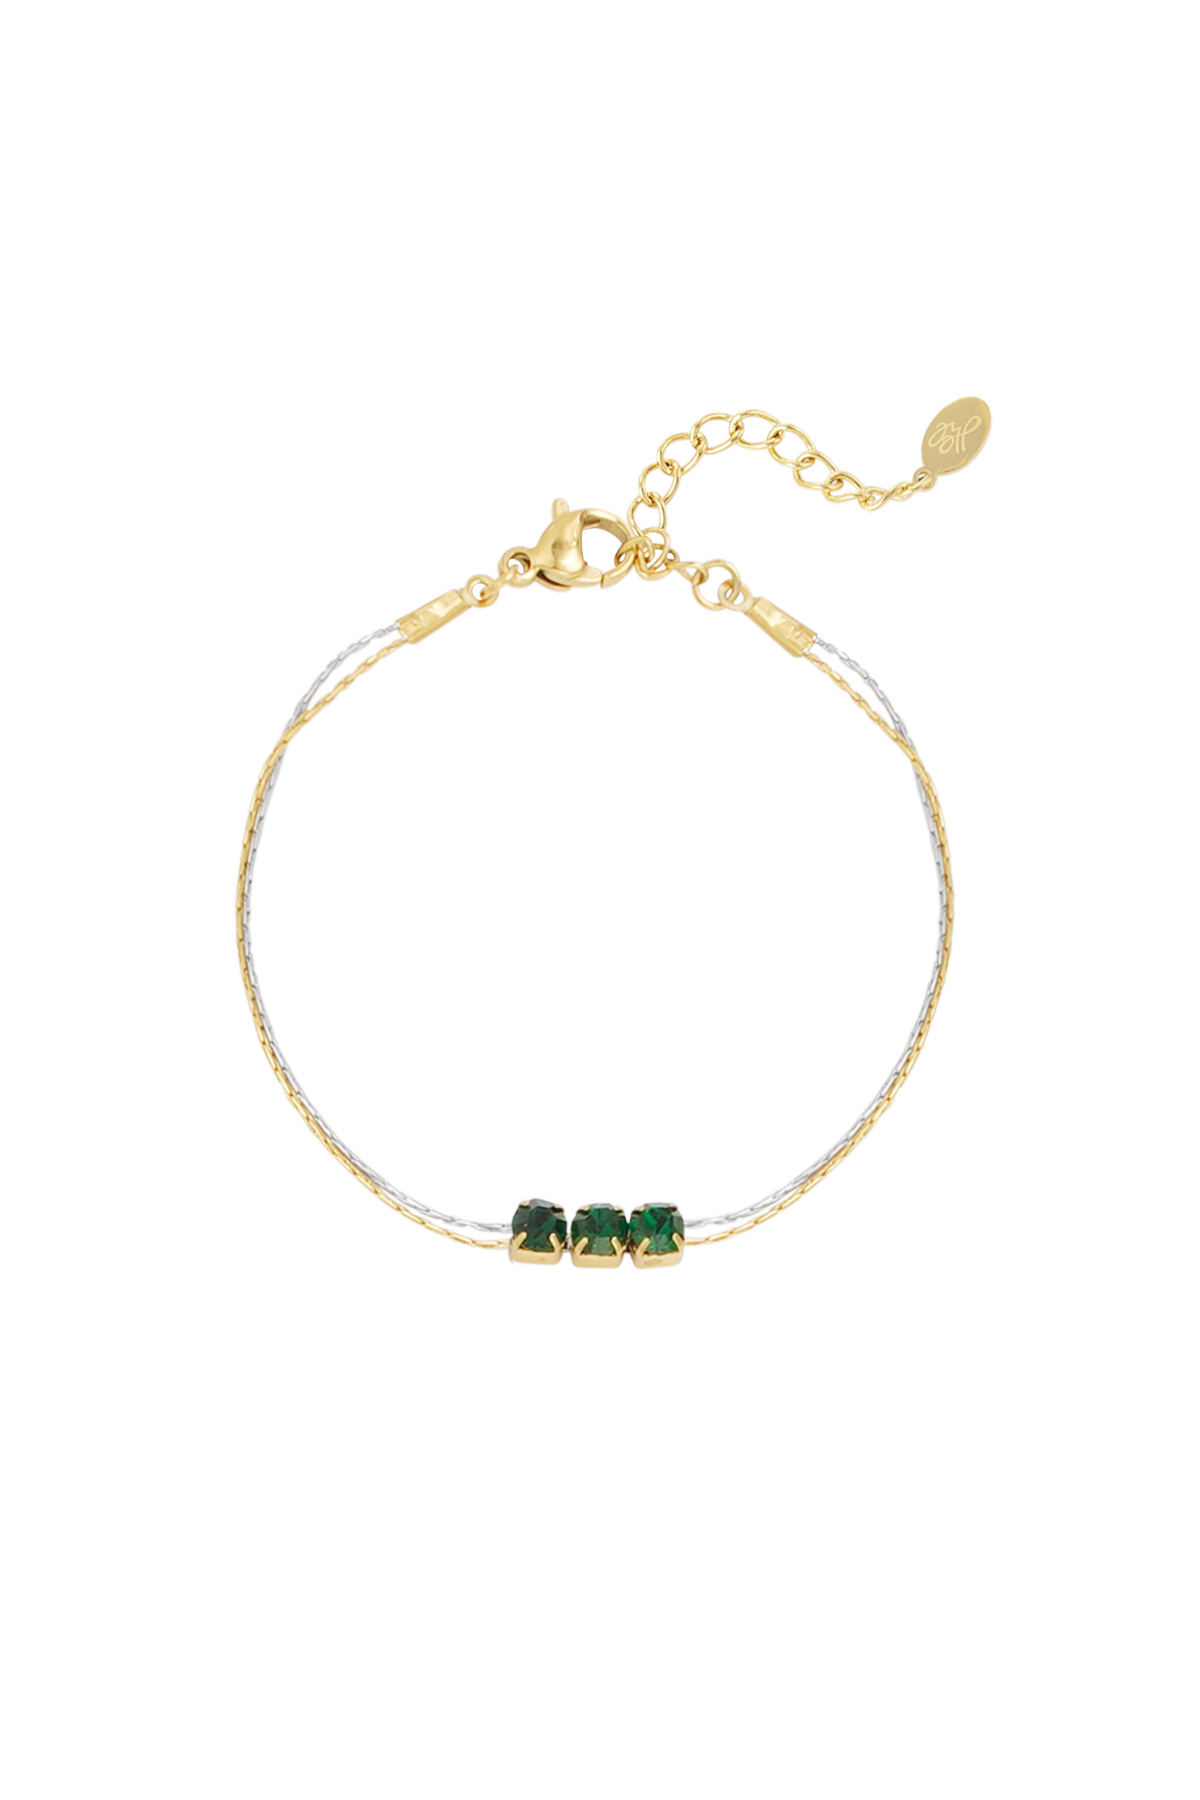 Bracelet gold/silver with stone - green